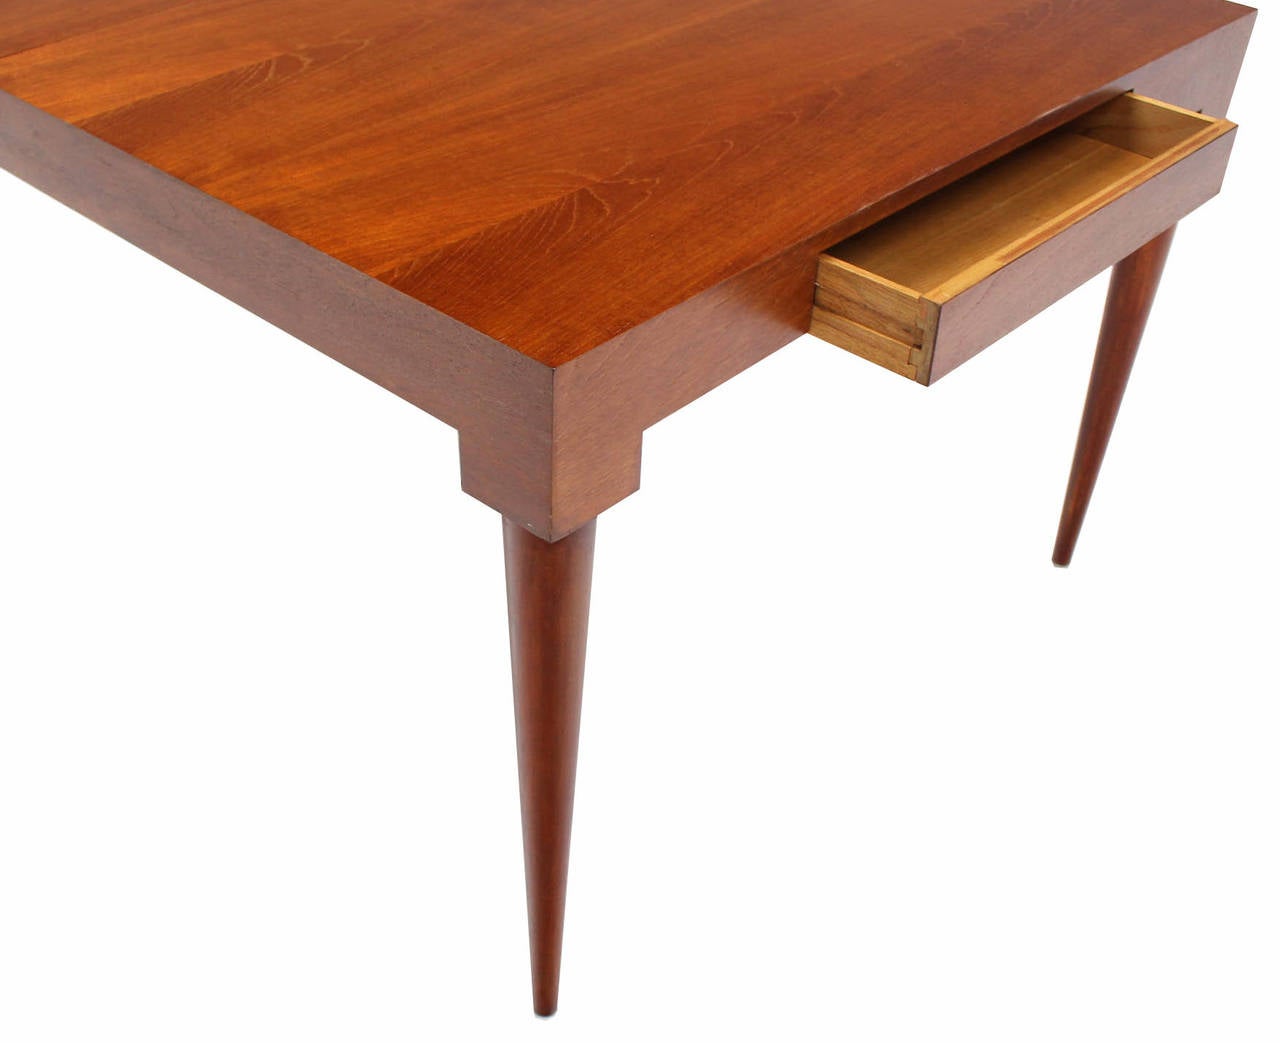 American Mid-Century Modern Teak Dining Table with Two Leaves